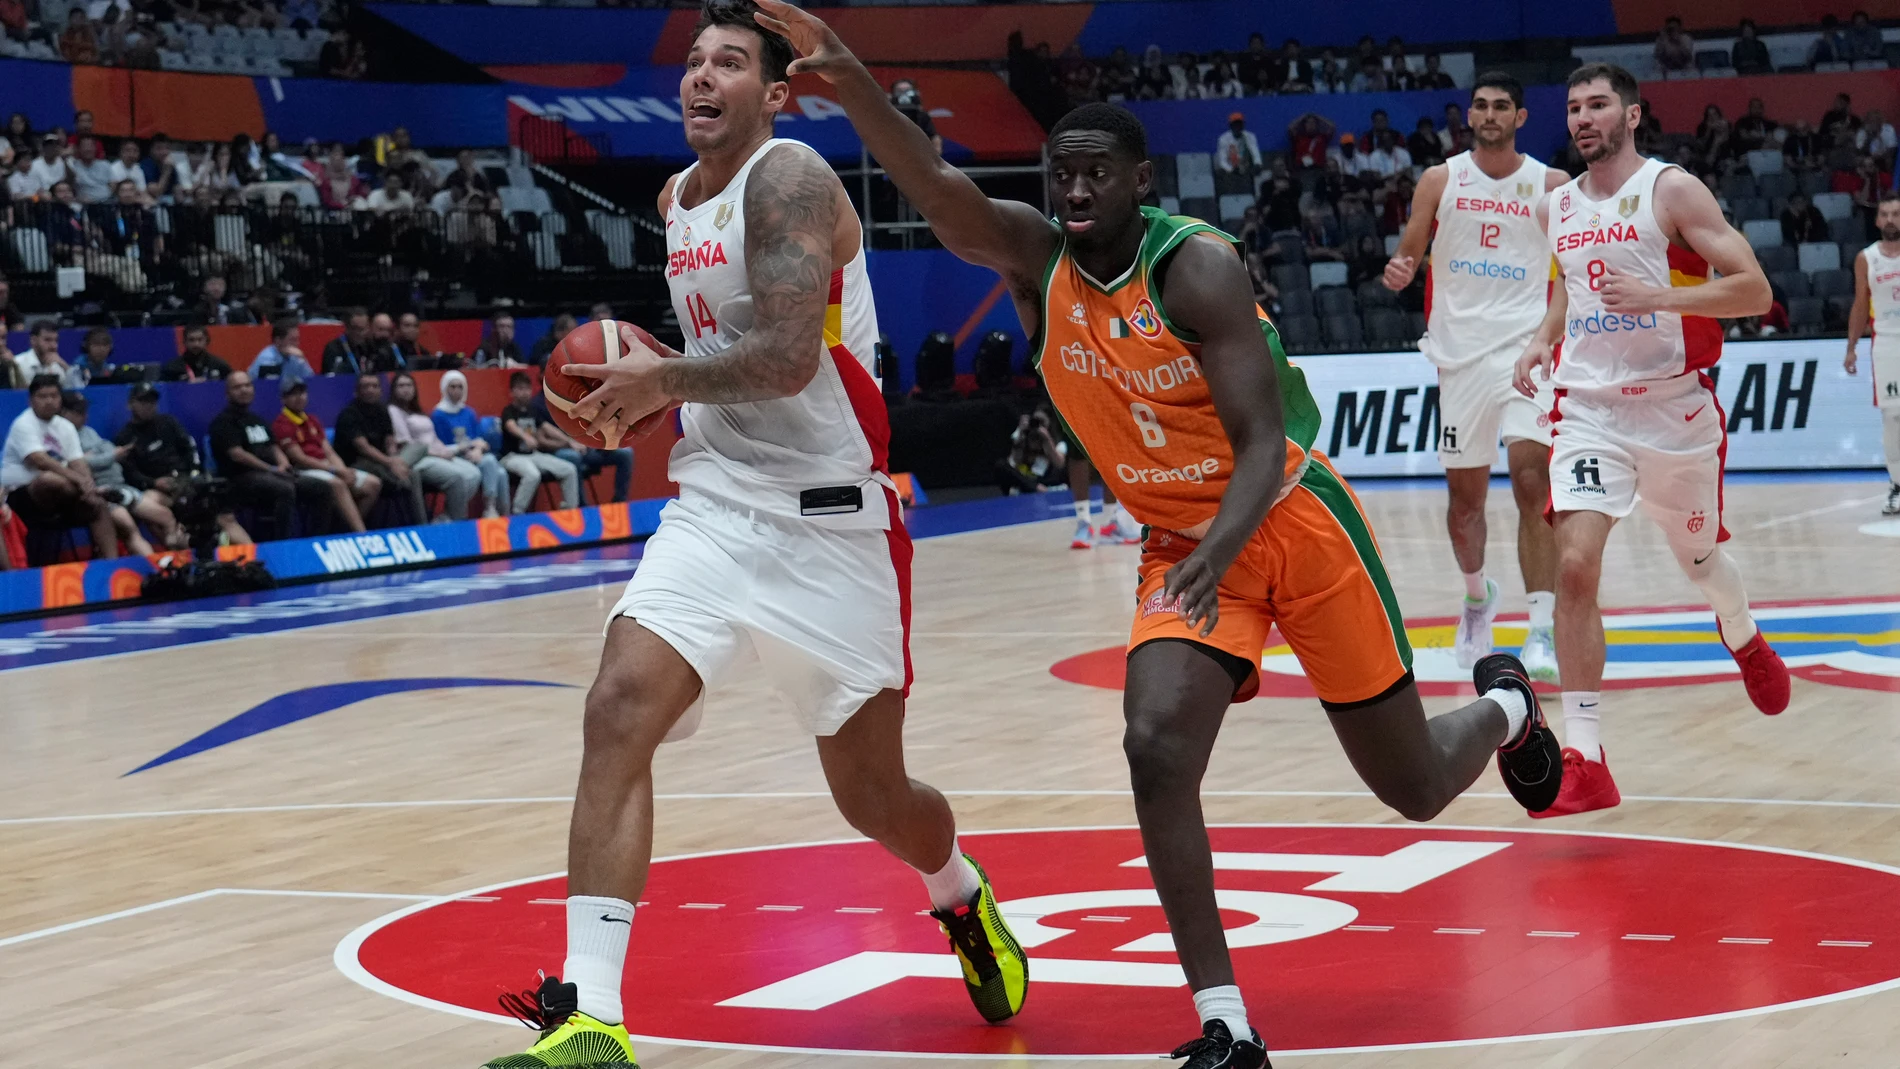 Spain center Willy Hernangomez (14) drives past Cote d'Ivoire forward Mike Fofana (8) during the Basketball World Cup group G match between Spain and Cote d'Ivoire at the Indonesia Arena stadium in Jakarta, Indonesia, Saturday, Aug. 26, 2023. (AP Photo/Achmad Ibrahim)